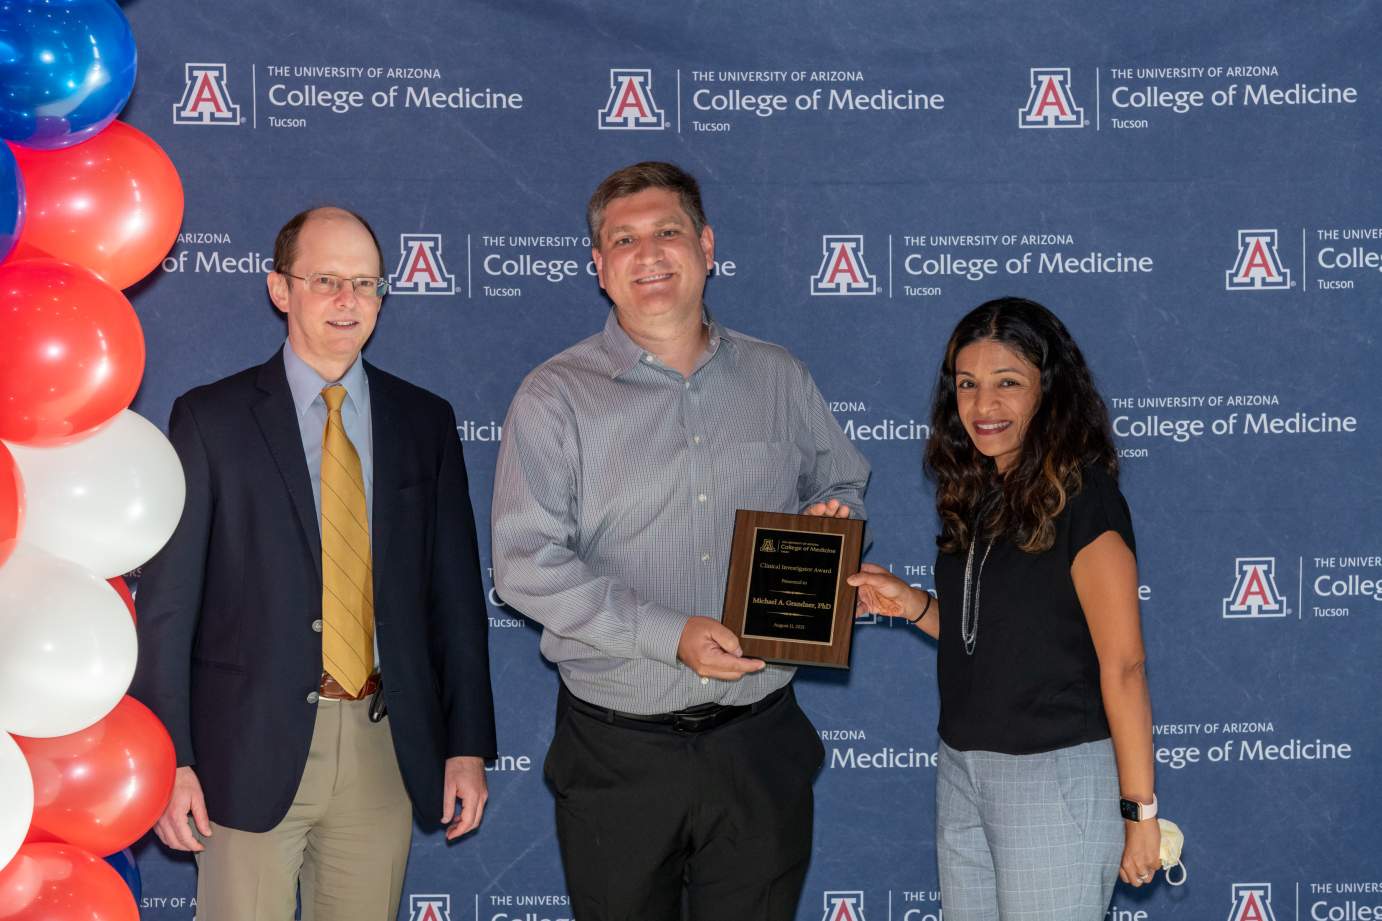 [Dr. Michael Grandner is presented with the Research Excellence Awards by Dr. Jason Wertheim and Dr. Rachna Shroff.]